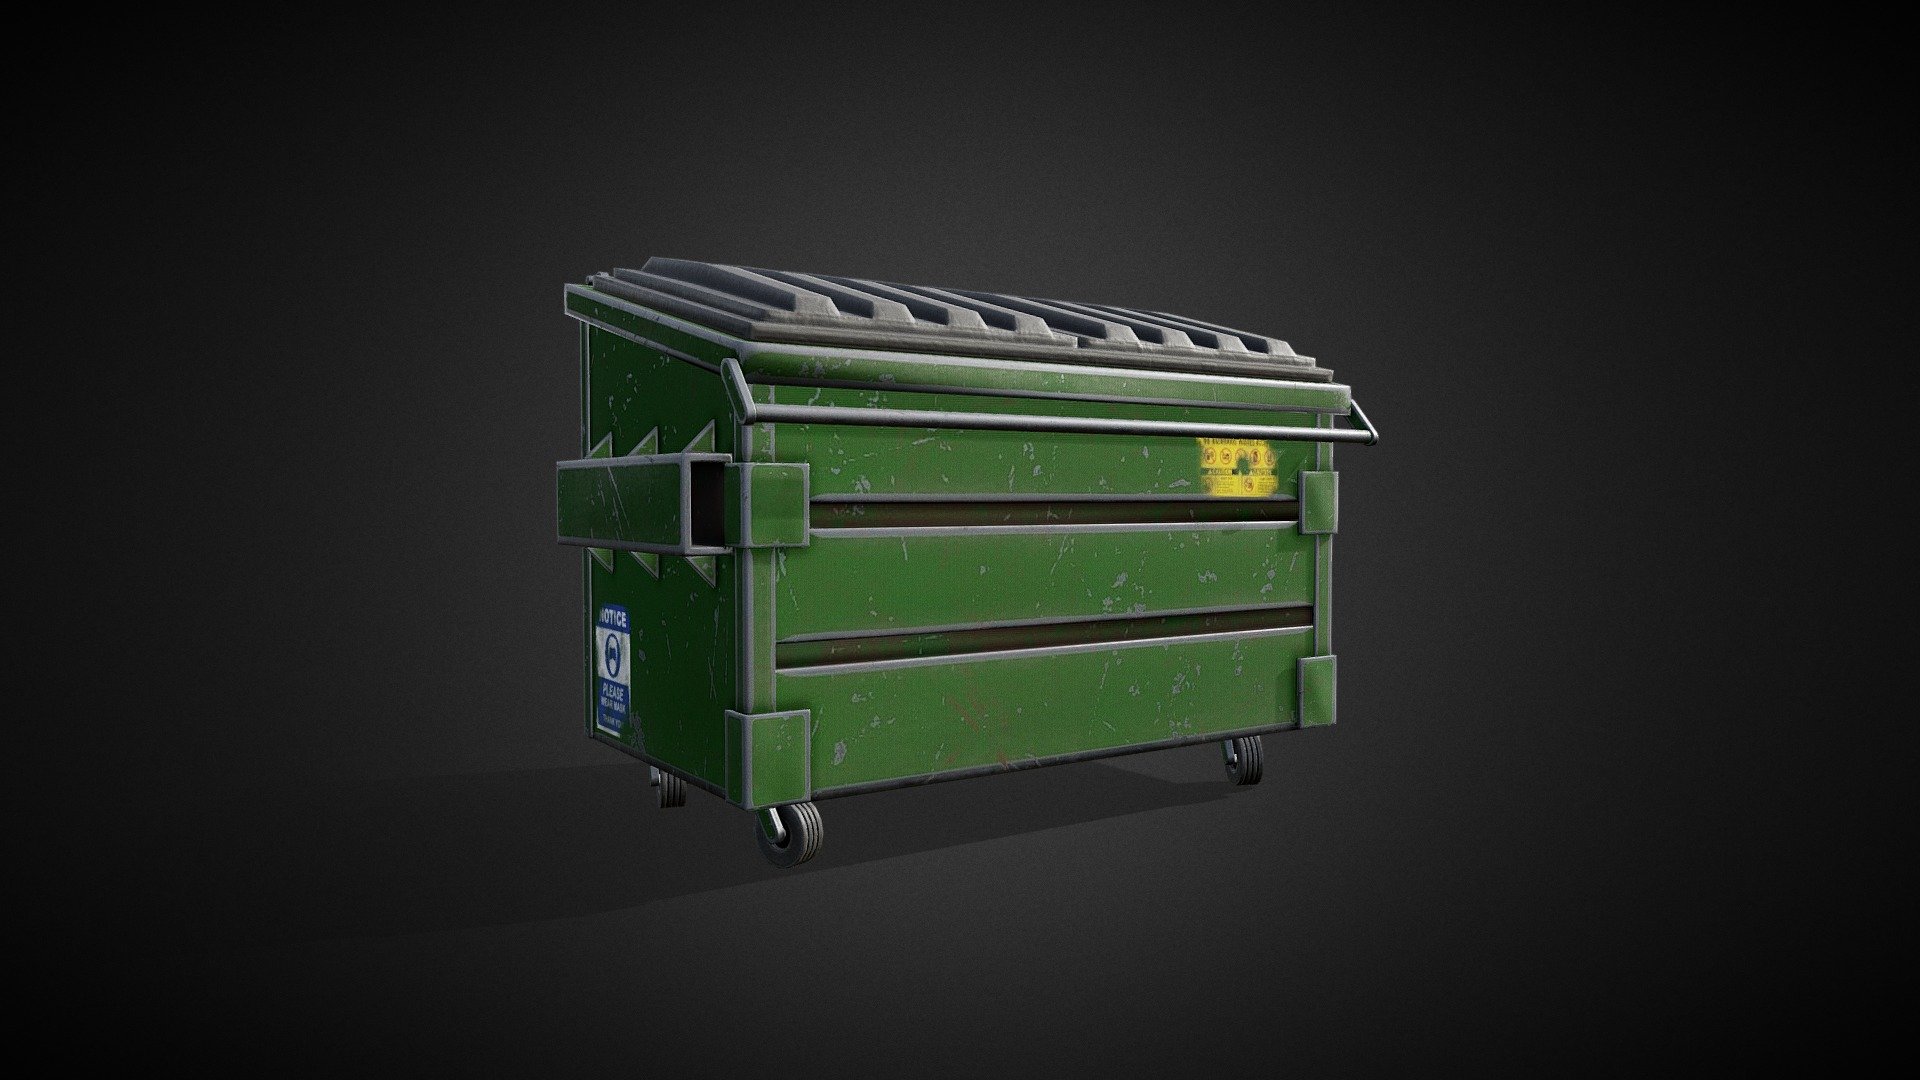 Tutorial here: https://www.youtube.com/channel/UC3R6lDf-Rlb9QW-D3CnhR7w

The model works perfectly in close-ups and high quality renders. It was originally modelled in 3ds Max 16, textured in Substance Painter and rendered with Marmoset Toolbag 3.

What is in the archive: MAX_16; OBJ; FBX ; Textures (2k resolution)

Features: Model resolutions are optimized for polygon efficiency. Model is fully textured with all materials applied. All textures and materials are included and mapped in every format. Autodesk 3ds Max models grouped for easy selection &amp; objects are logically named for ease of scene management. No cleaning up necessary, just drop model into your scene and start rendering. No special plugin needed to open scene.

Textures formats: PNG (2K) - Dumpster- Tutorial Included - Buy Royalty Free 3D model by ninashaw 3d model